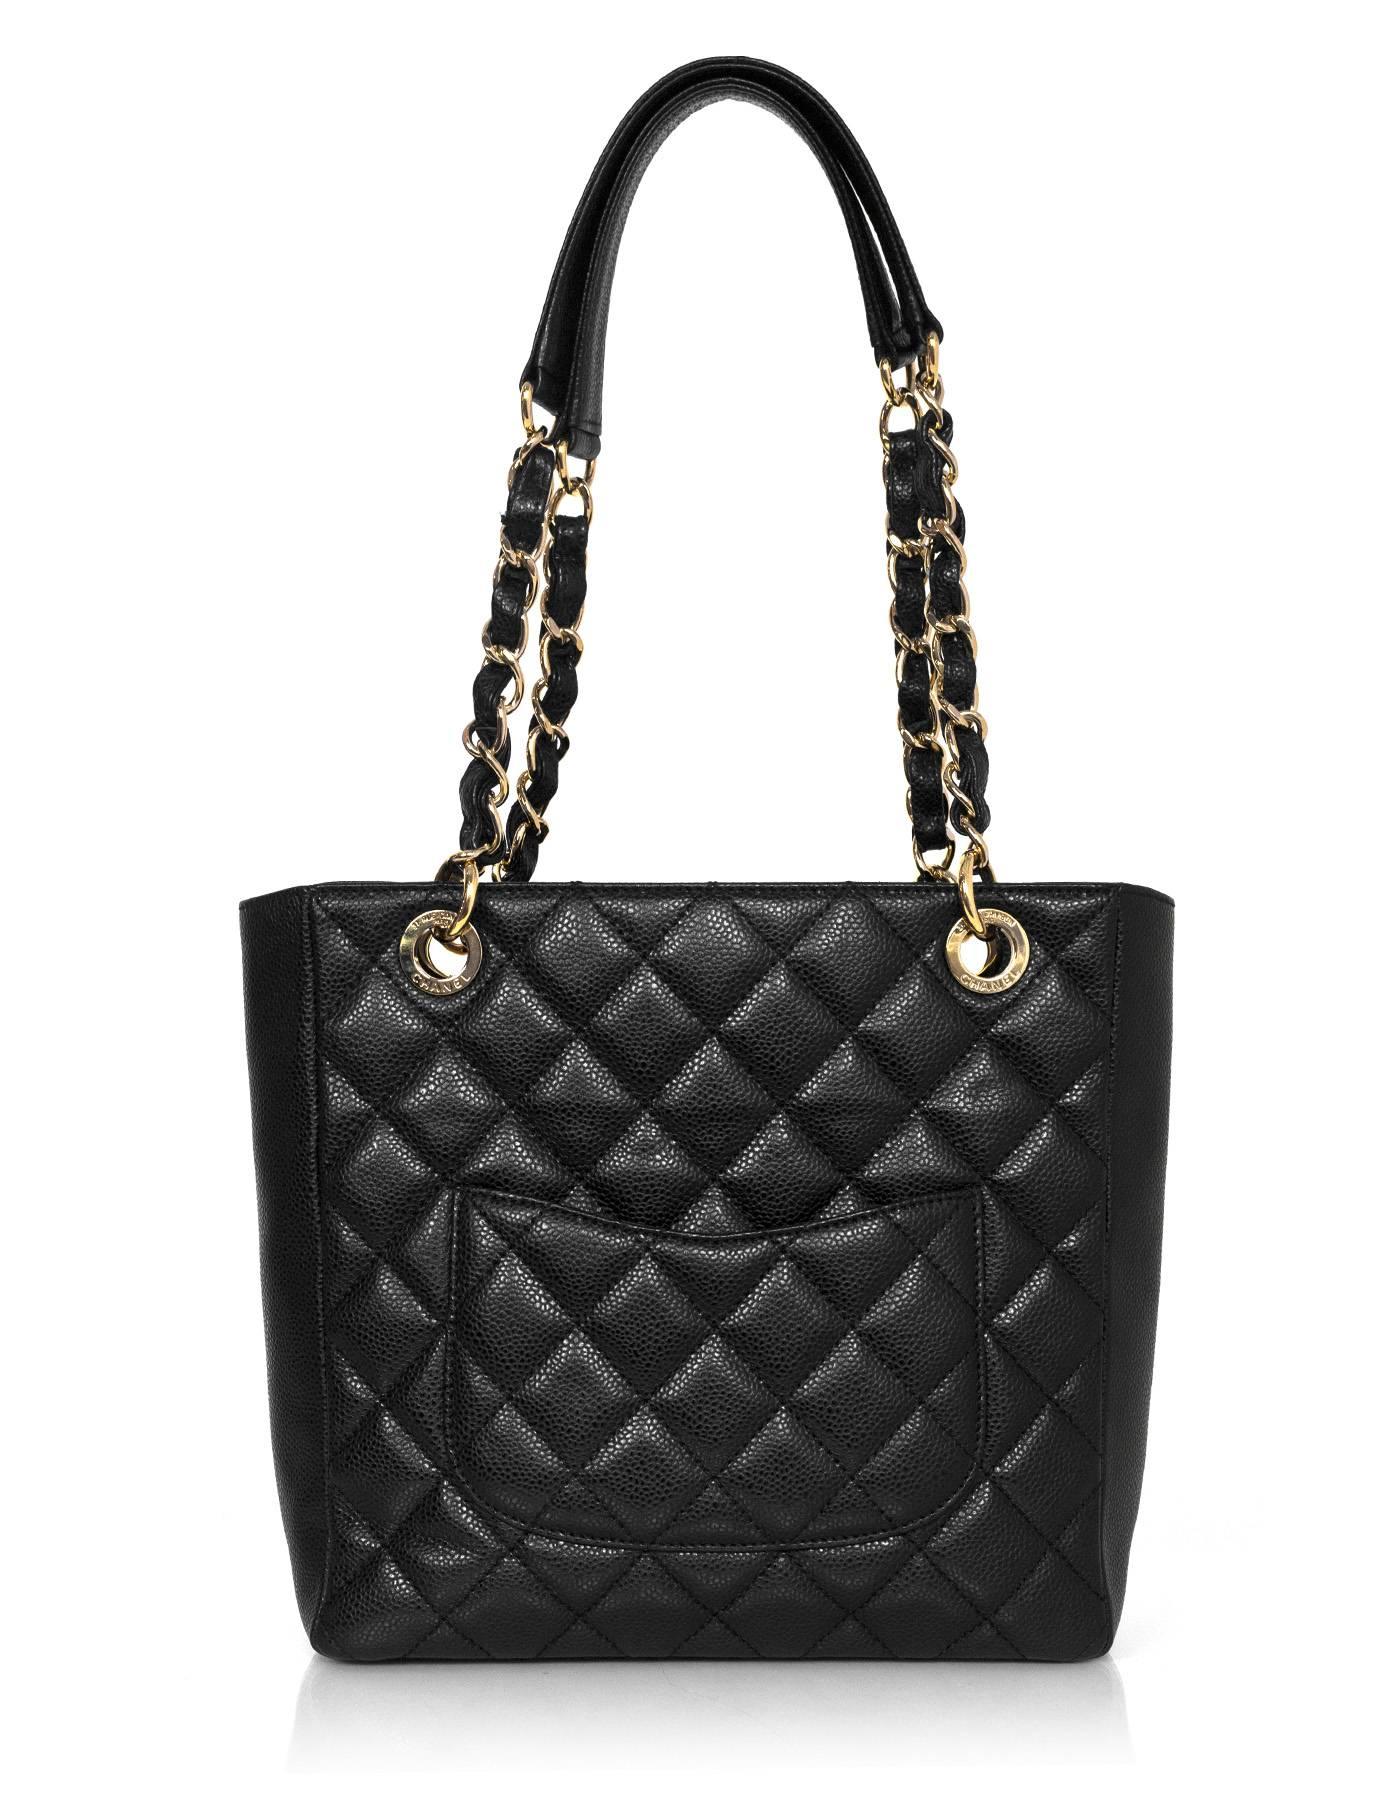 Chanel Black Caviar Leather PST Petite Shopper Tote Bag GHW In Excellent Condition In New York, NY